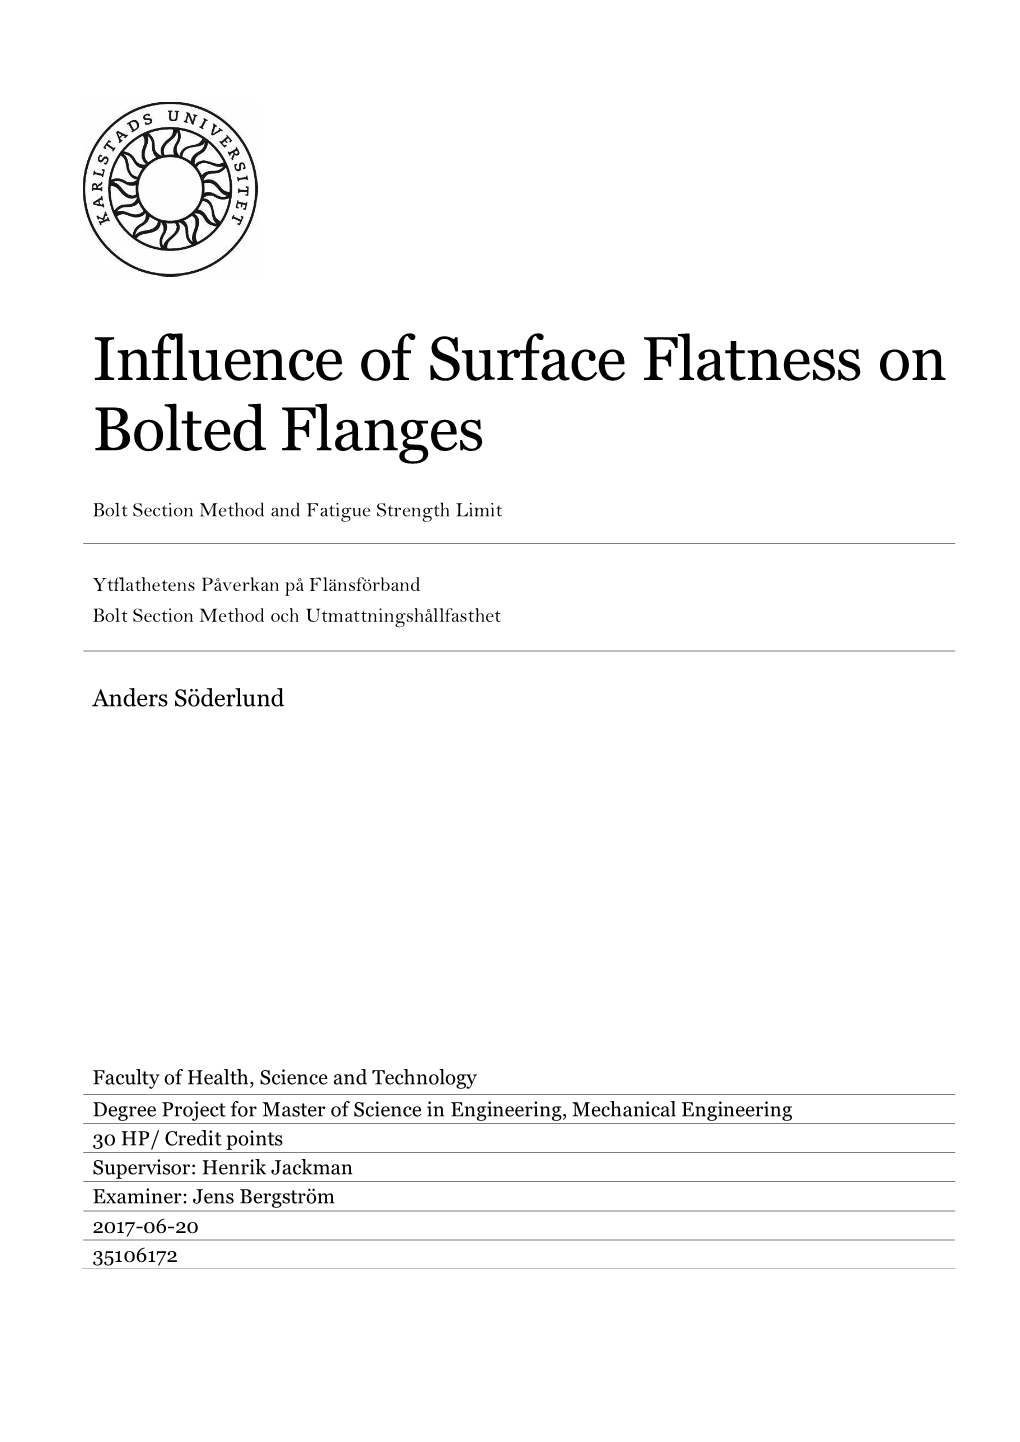 Influence of Surface Flatness on Bolted Flanges Strength and Fatigue Strength Limit ANDERS SÖDERLUND